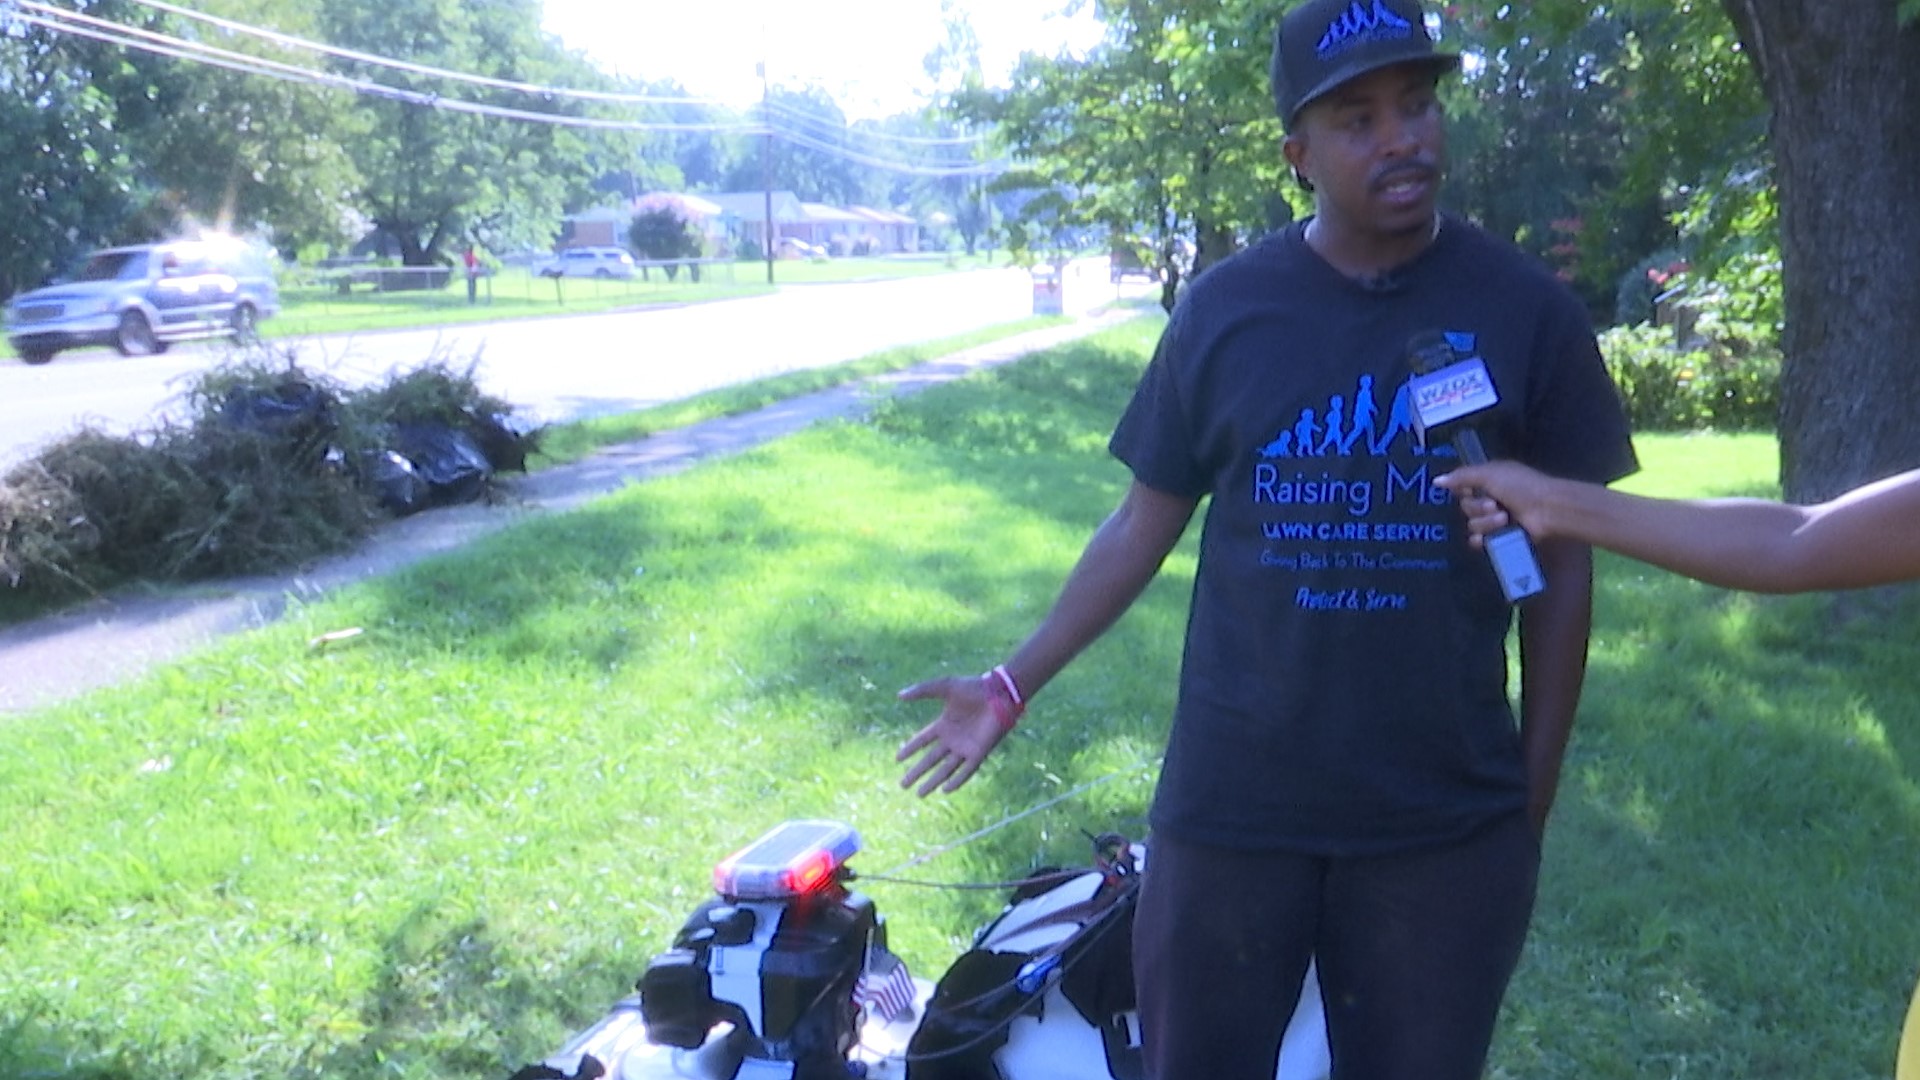 Today, the Huntsville native kicked off his sixth country-wide tour right here in his hometown. This time around, he’s focusing on bridging the gap between police officers and the communities they serve. Smith invites law enforcement officers in each city to come out and help him mow lawns.